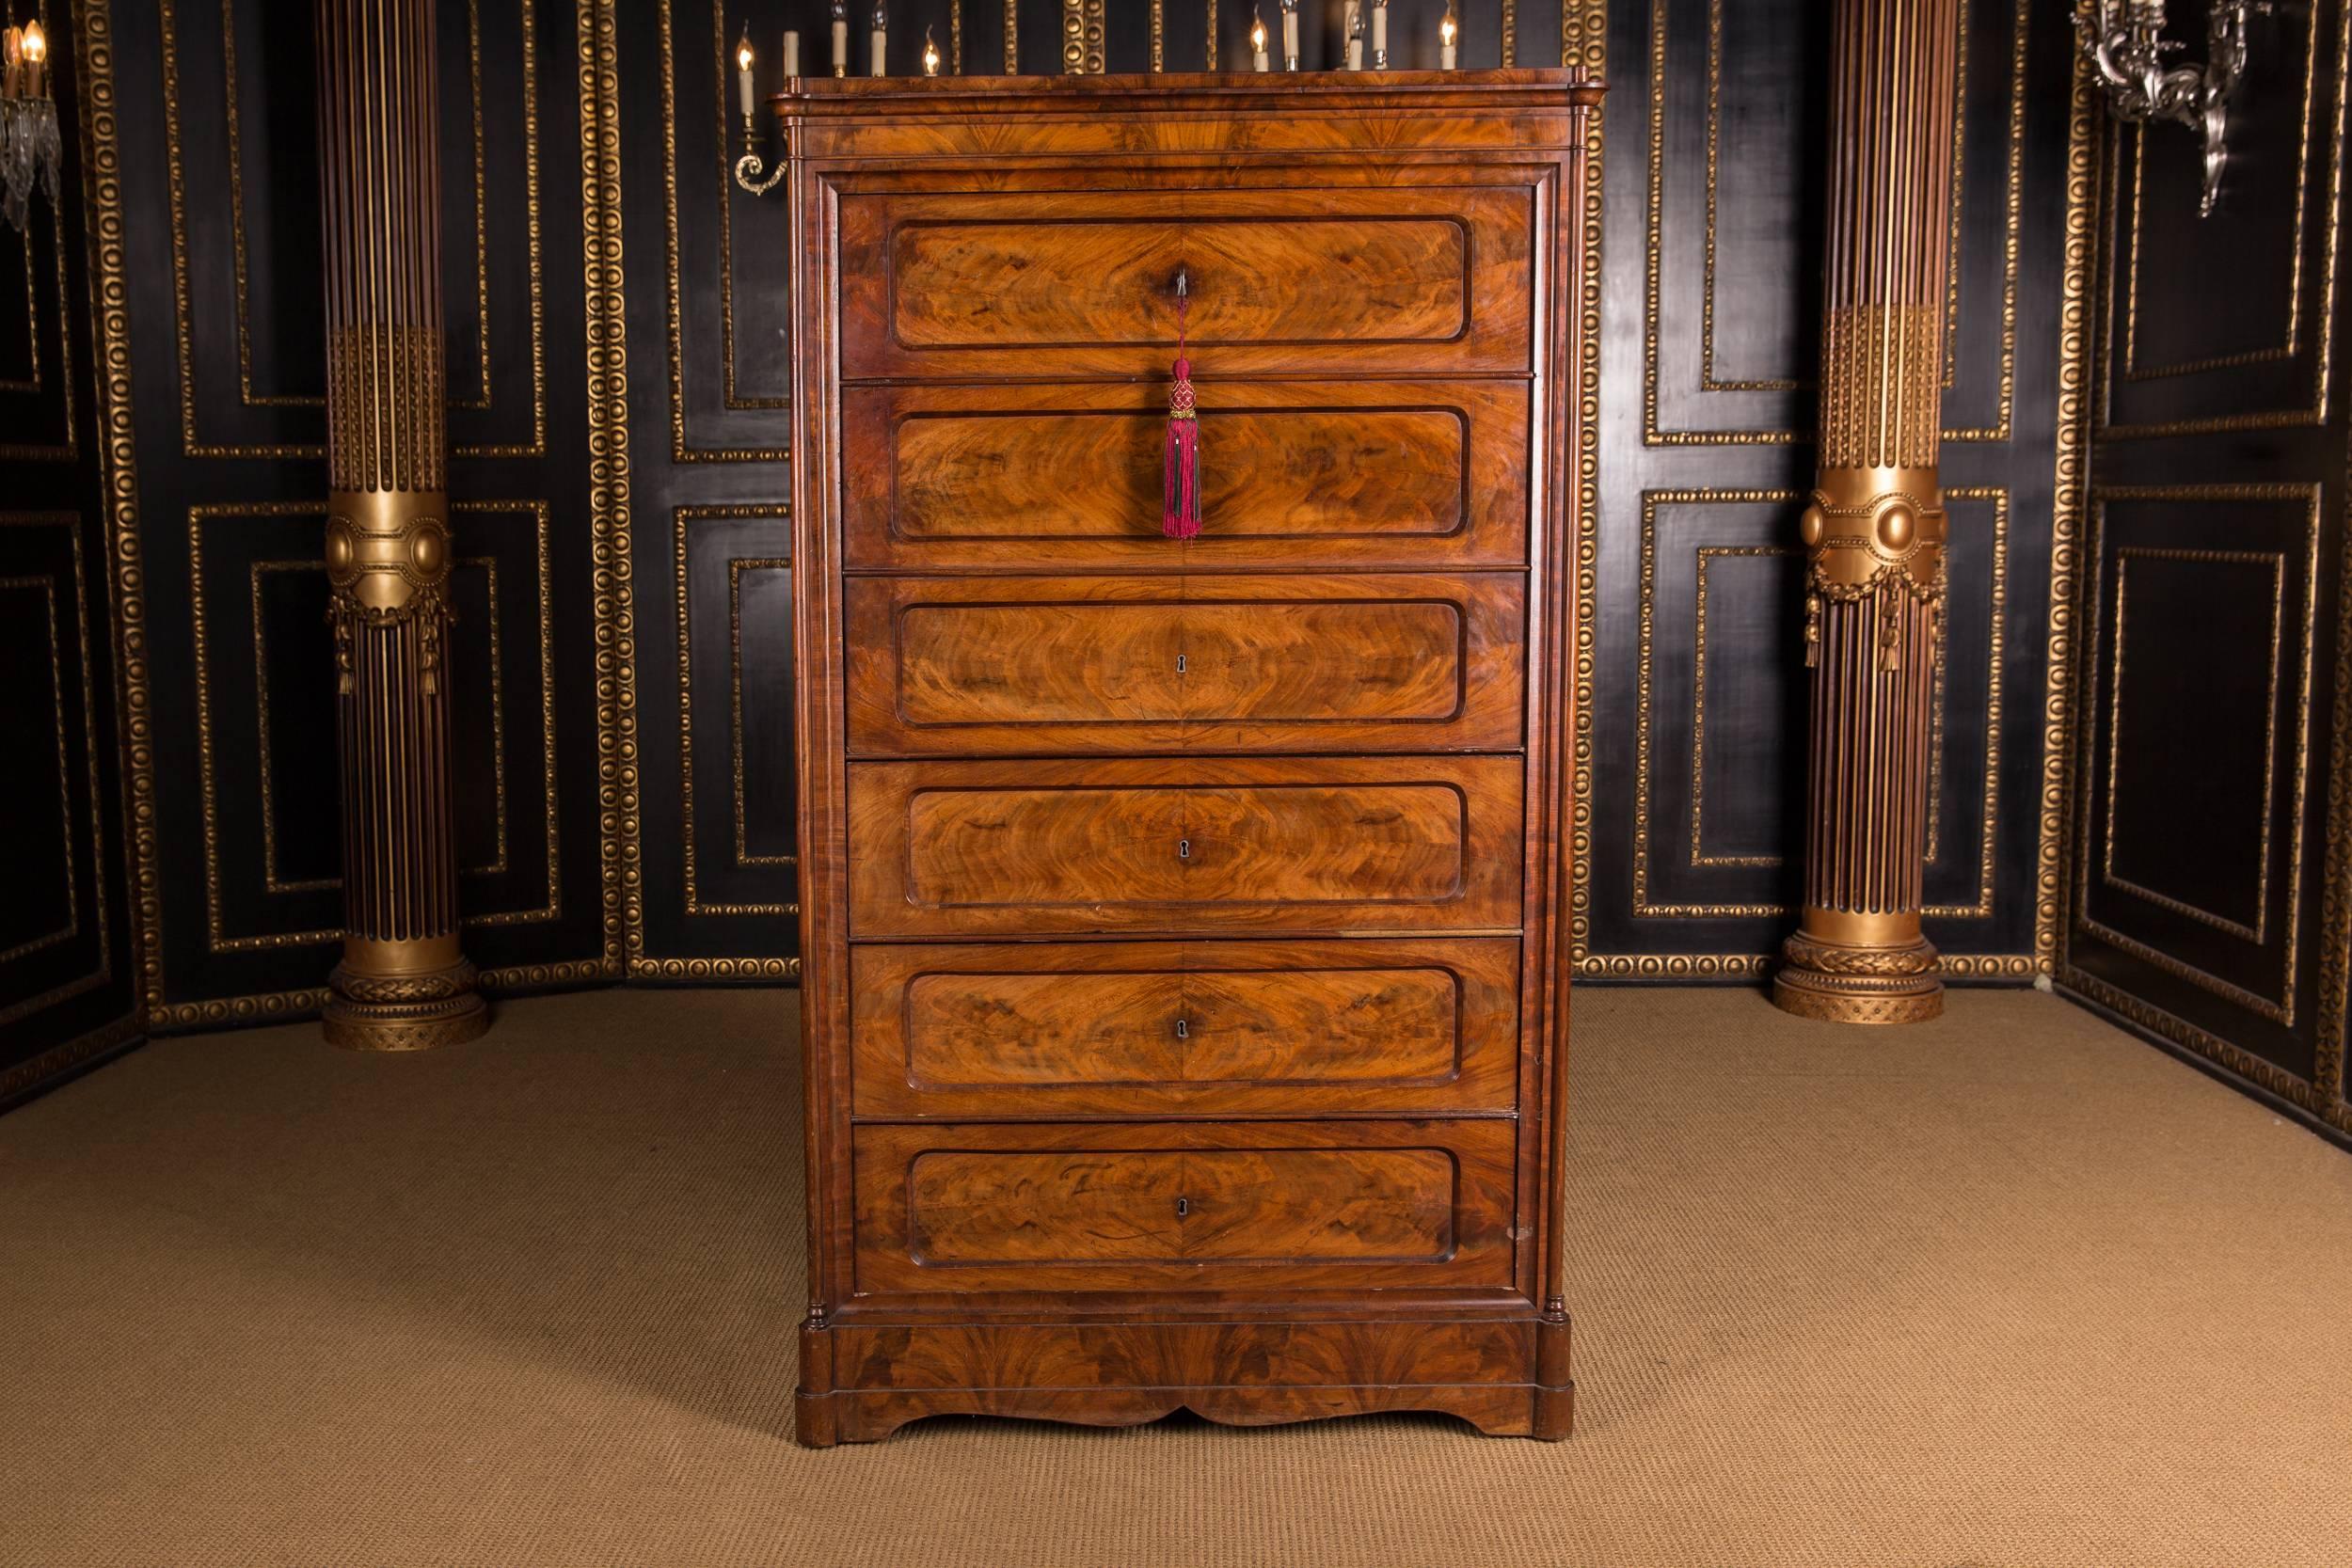 Mahogany on softwood. Rectangular body with curved profile cornice ending in pad feet. In the front six drawers with pyramidal grains.